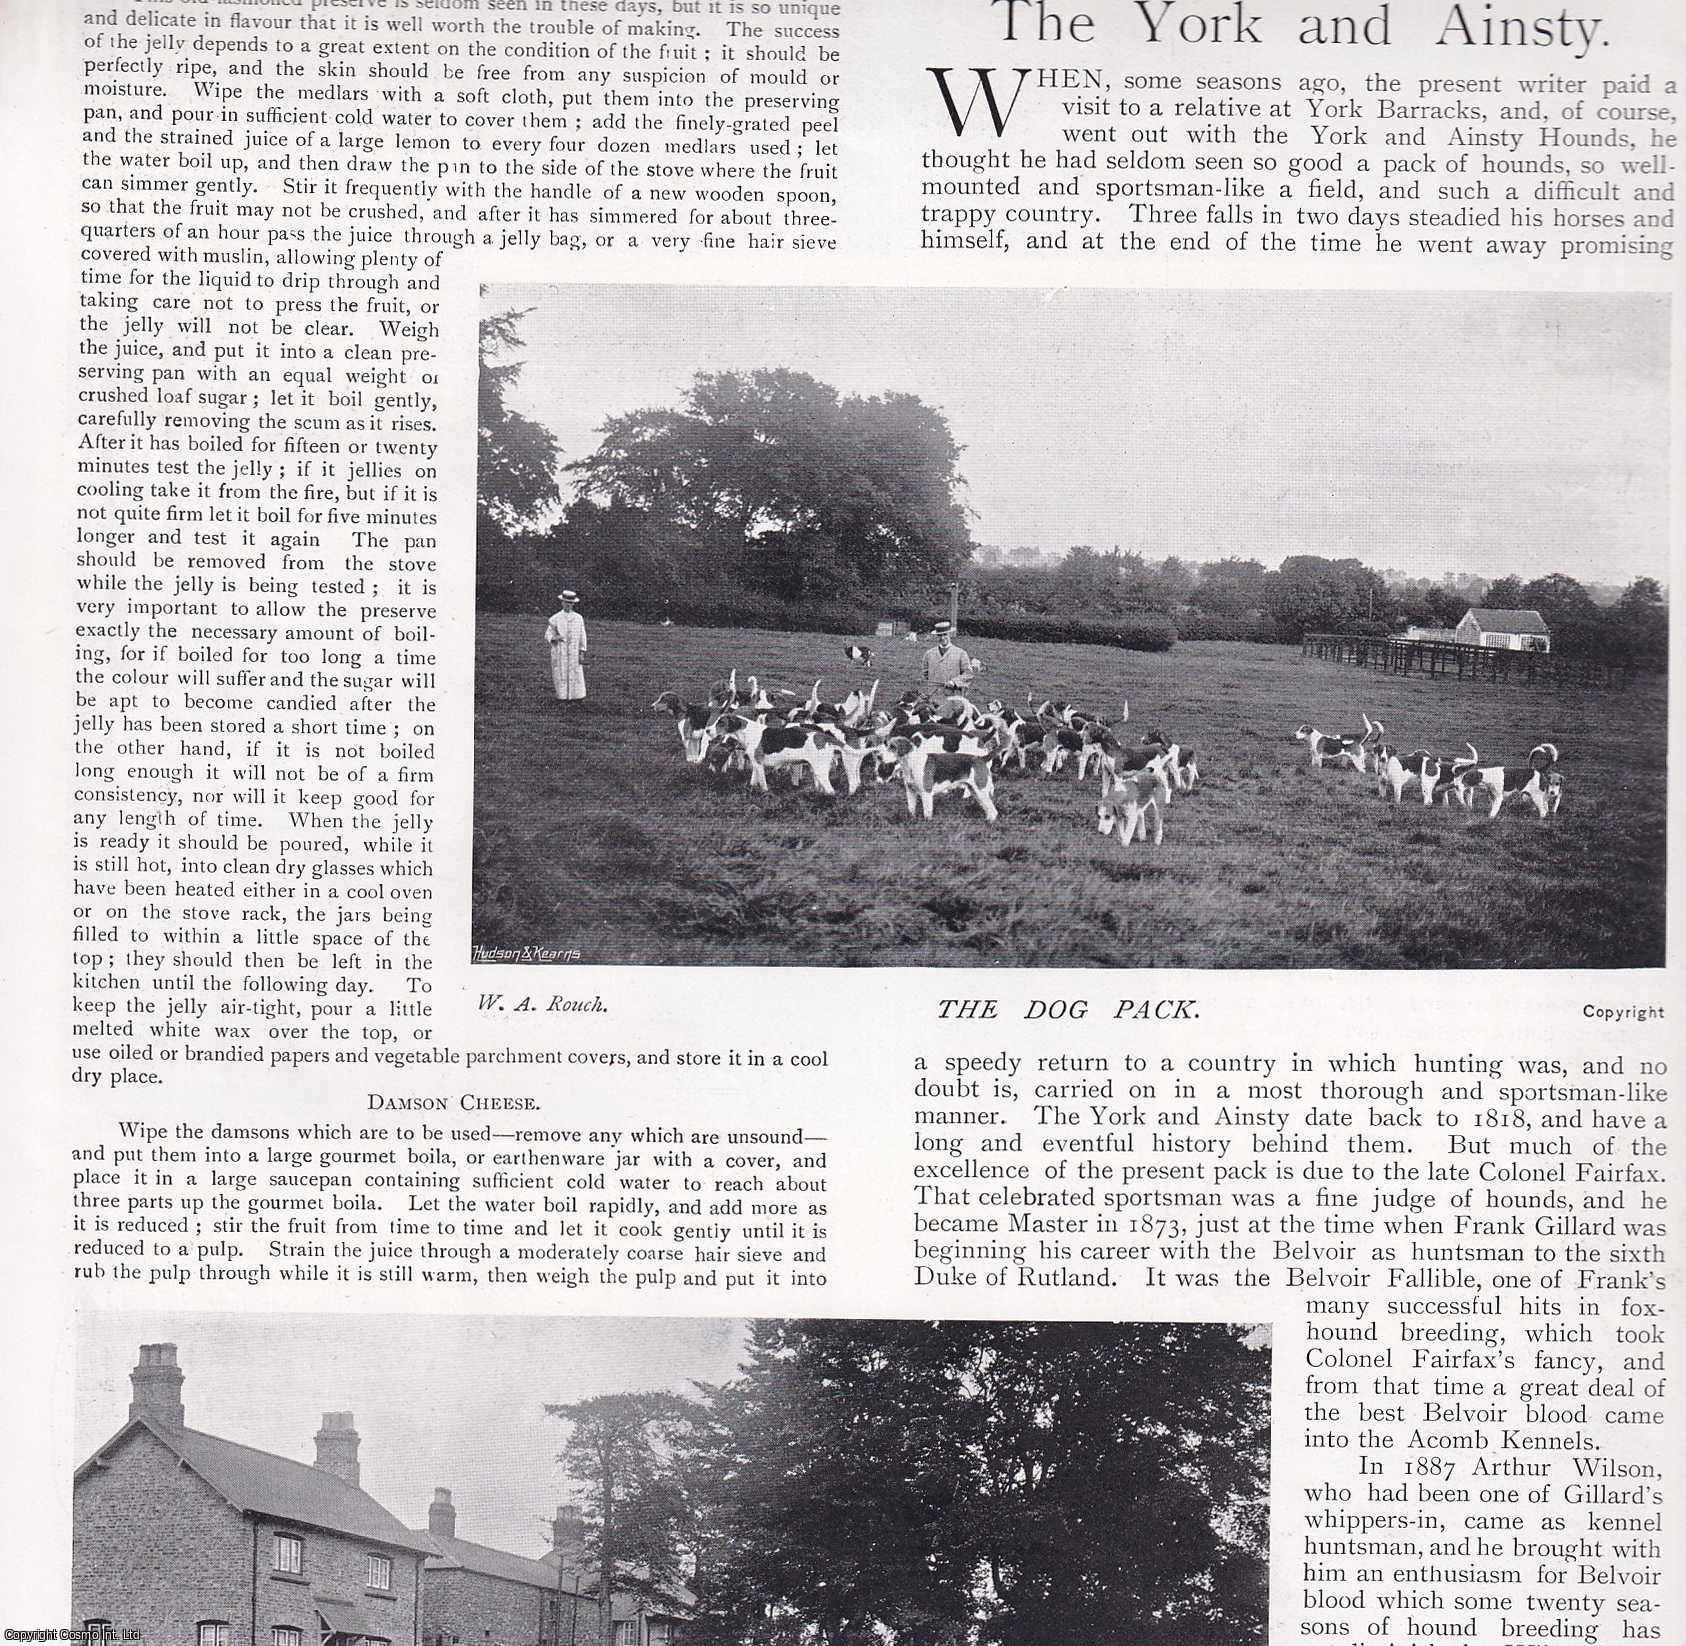 FOX HUNTING - The York and Ainsty Hounds. Several pictures and accompanying text, removed from an original issue of Country Life Magazine, 1899.